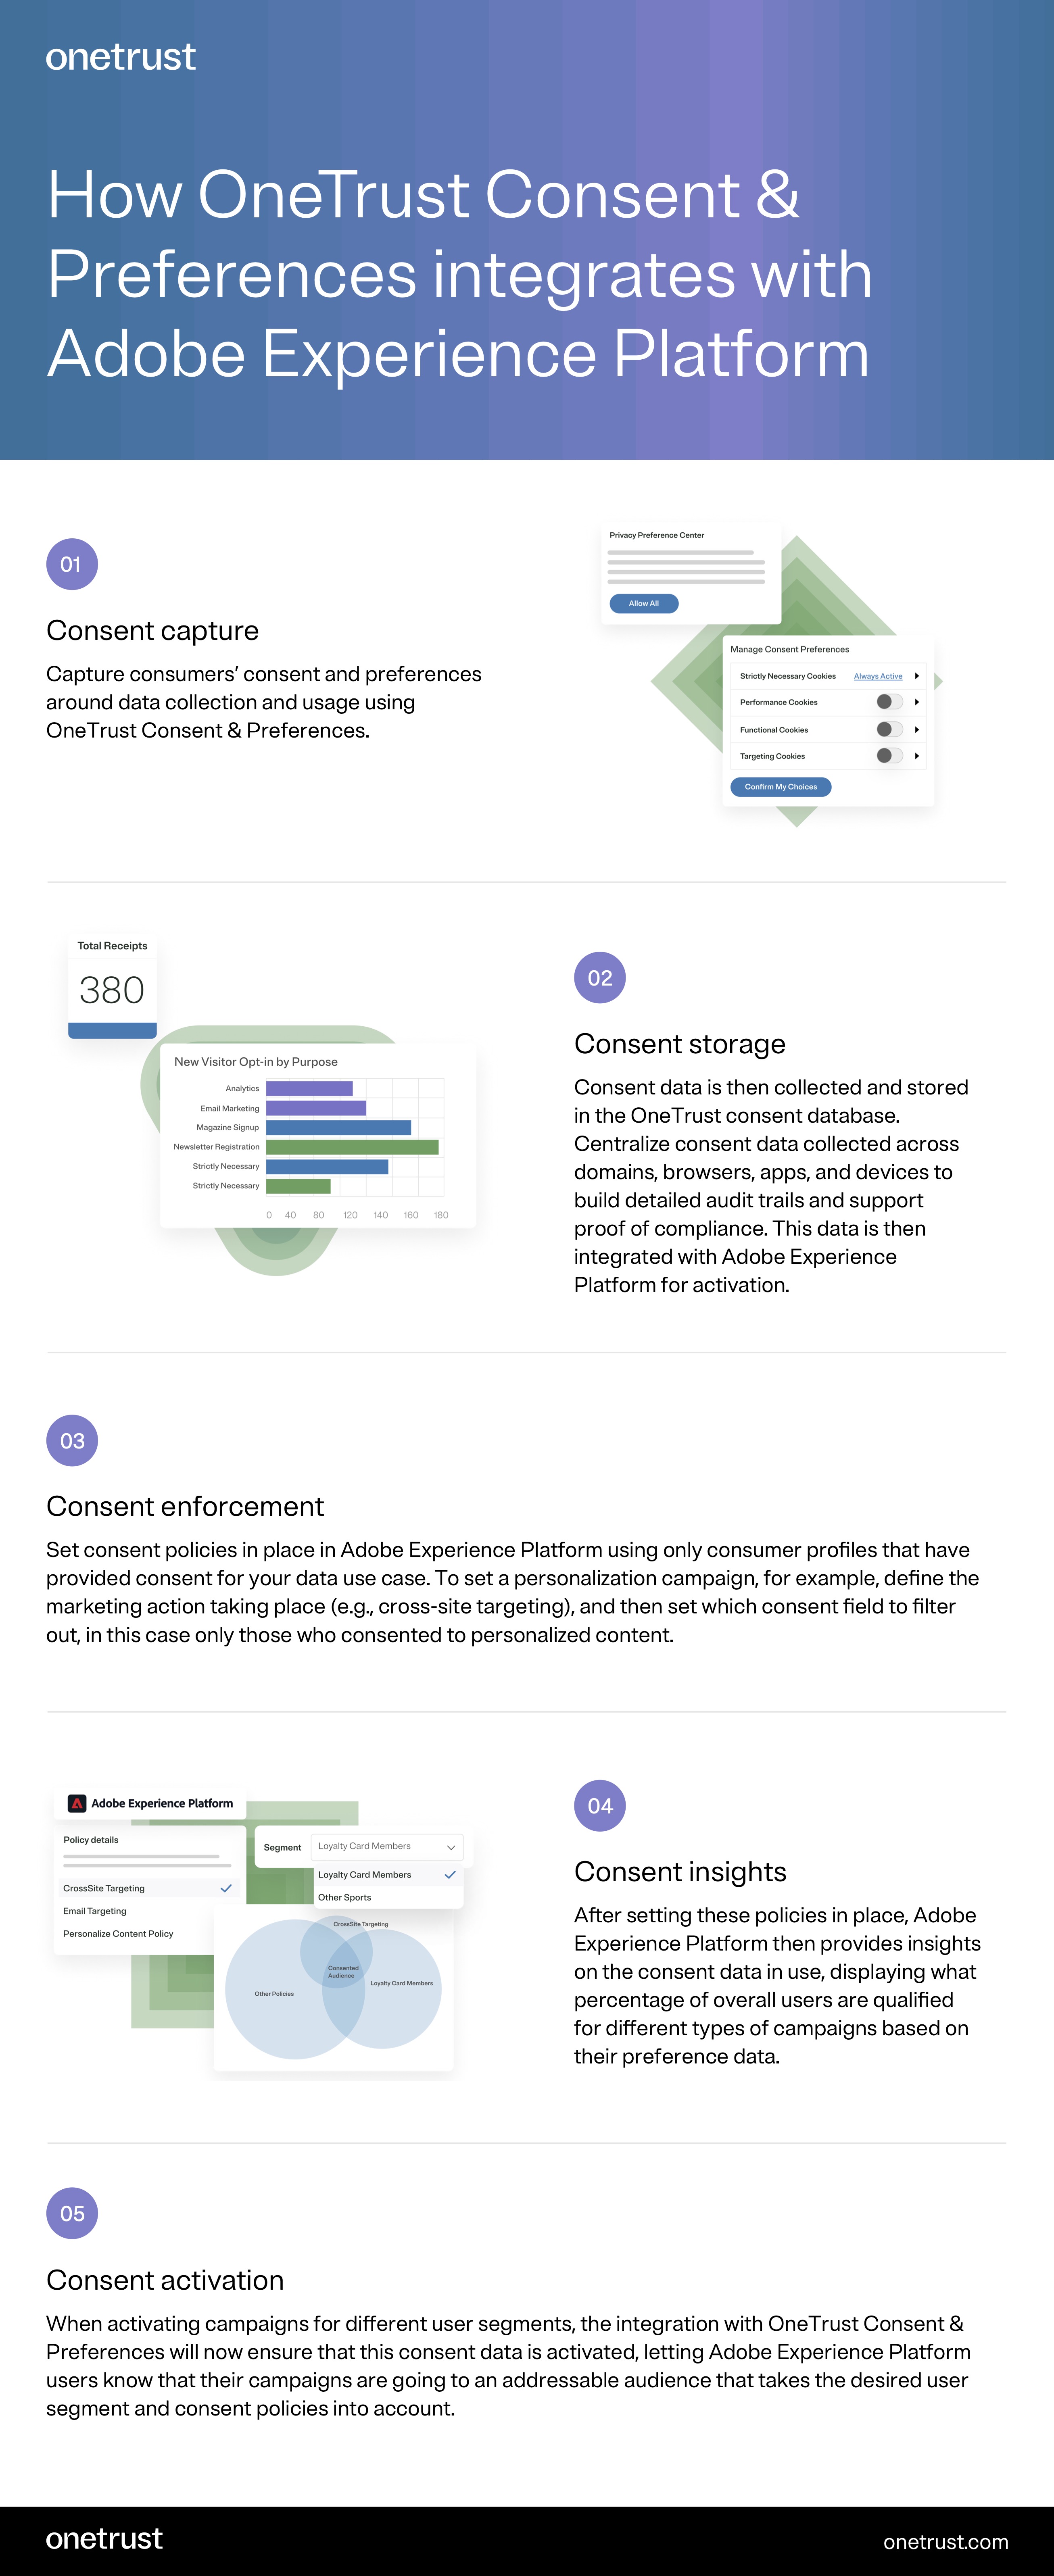 Infographic entitled “How OneTrust Consent and Preferences integrates with Adobe Experience Platform.” It describes the integration with five points. The first point talks about OneTrust Consent and Preferences consent capture capabilities, where it can capture consumers’ consent and preferences around data collection and usage using OneTrust Consent and Preferences. The next feature is “consent storage.” Consent data is collected and stored in the OneTrust consent database, where it centralizes consent data collected across domains, browsers, apps, and devices to build detailed audit trails and support proof of compliance. This data is then integrated with Adobe Experience Platform for activation. The third point is “consent enforcement.” A manager can set consent policies in place in Adobe Experience Platform using only consumer profiles that have provided consent for your data use case. For example, the manager can set a personalization campaign by defining the marketing action taking place, such as cross-site targeting, and then setting which consent field to filter out, in this case only those those who consented to personalized content. Next, “consent insights,” is how Adobe Experience Platform then provides insights on the consent data in use, displaying what percentage of overall users are qualified for different types of campaigns based on their preference data. Finally, there is “consent activation.” When activating campaigns for different user segments, the integration with OneTrust Consent and Preferences will ensure that this consent data is activated, letting Adobe Experience Platform uses know that their campaigns are going to an addressable audience that takes the desired user segment and consent policies into account.